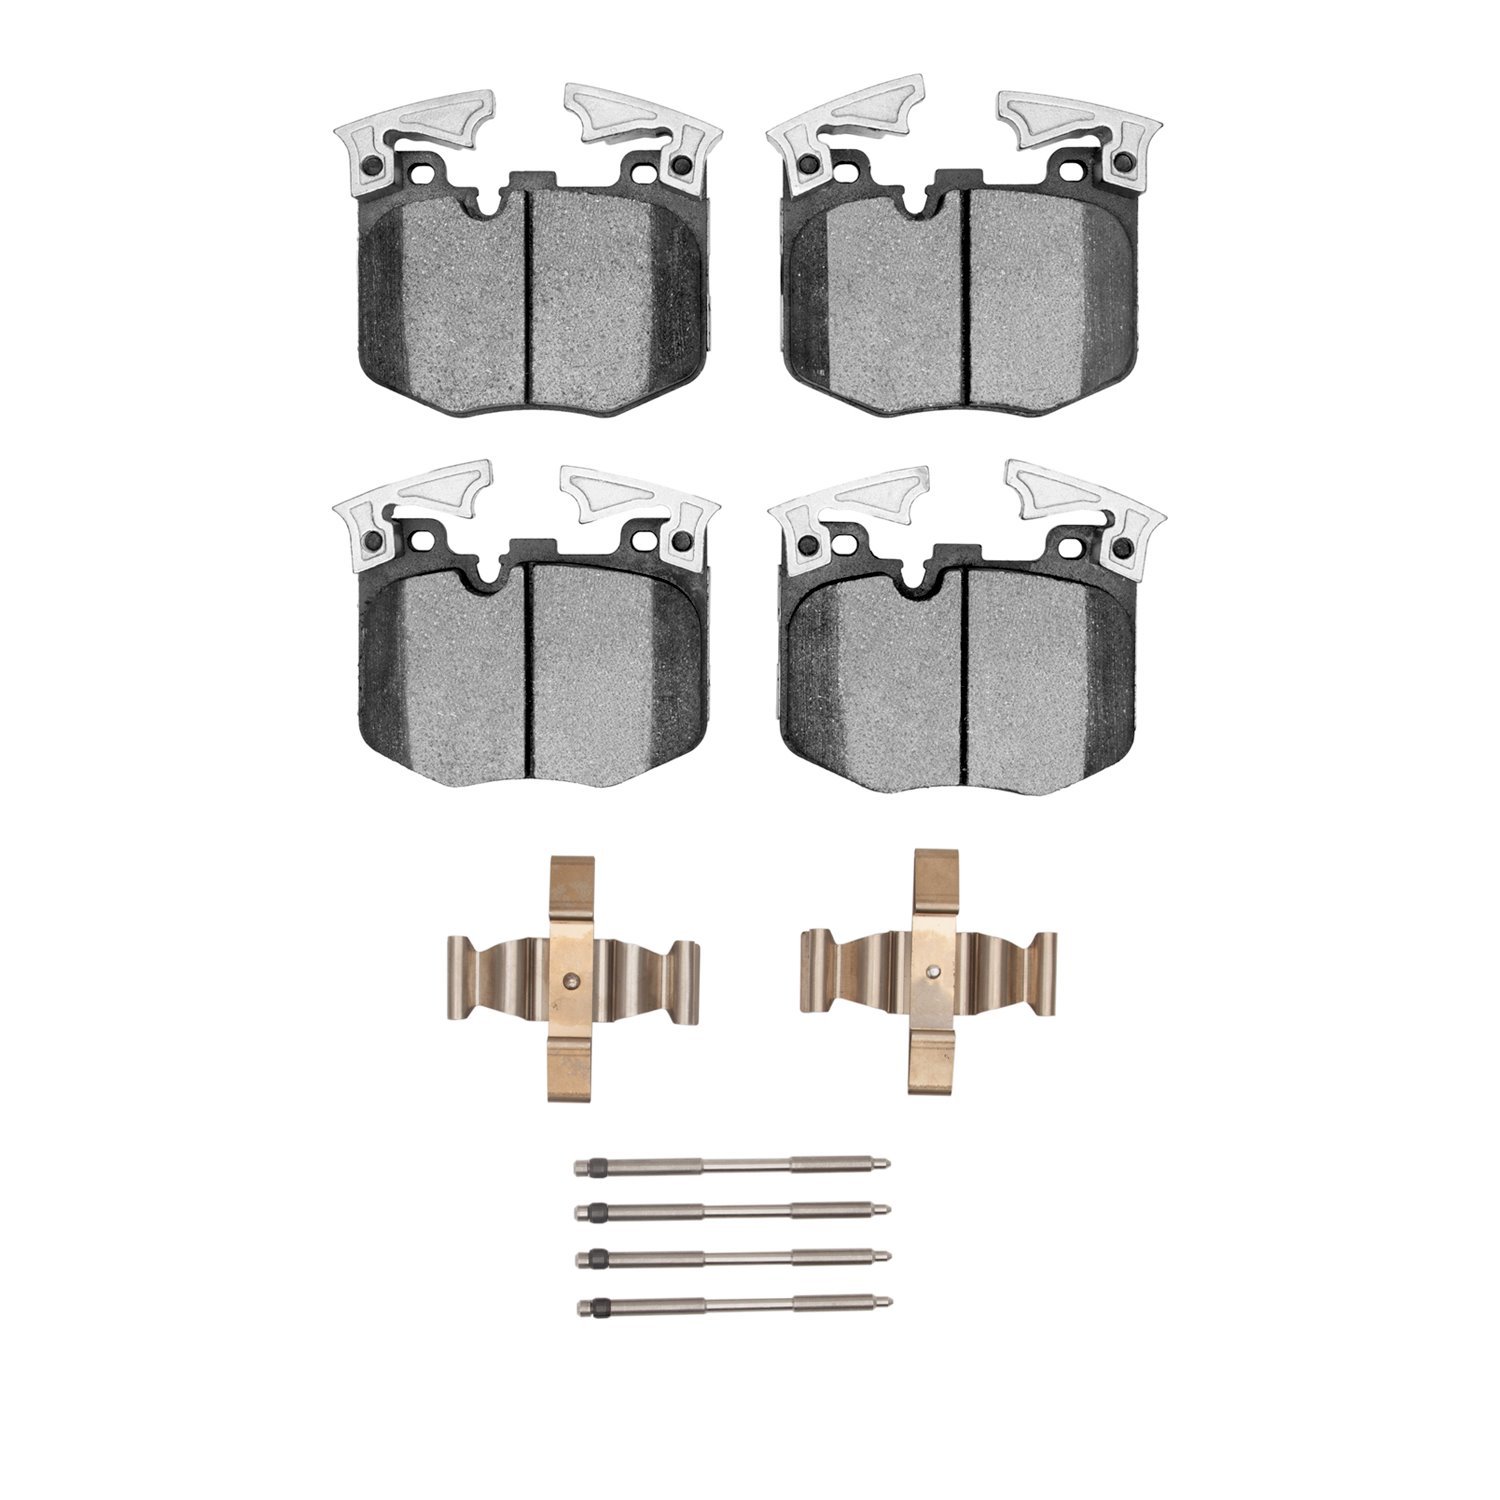 1552-1867-01 5000 Advanced Low-Metallic Brake Pads & Hardware Kit, Fits Select Multiple Makes/Models, Position: Front